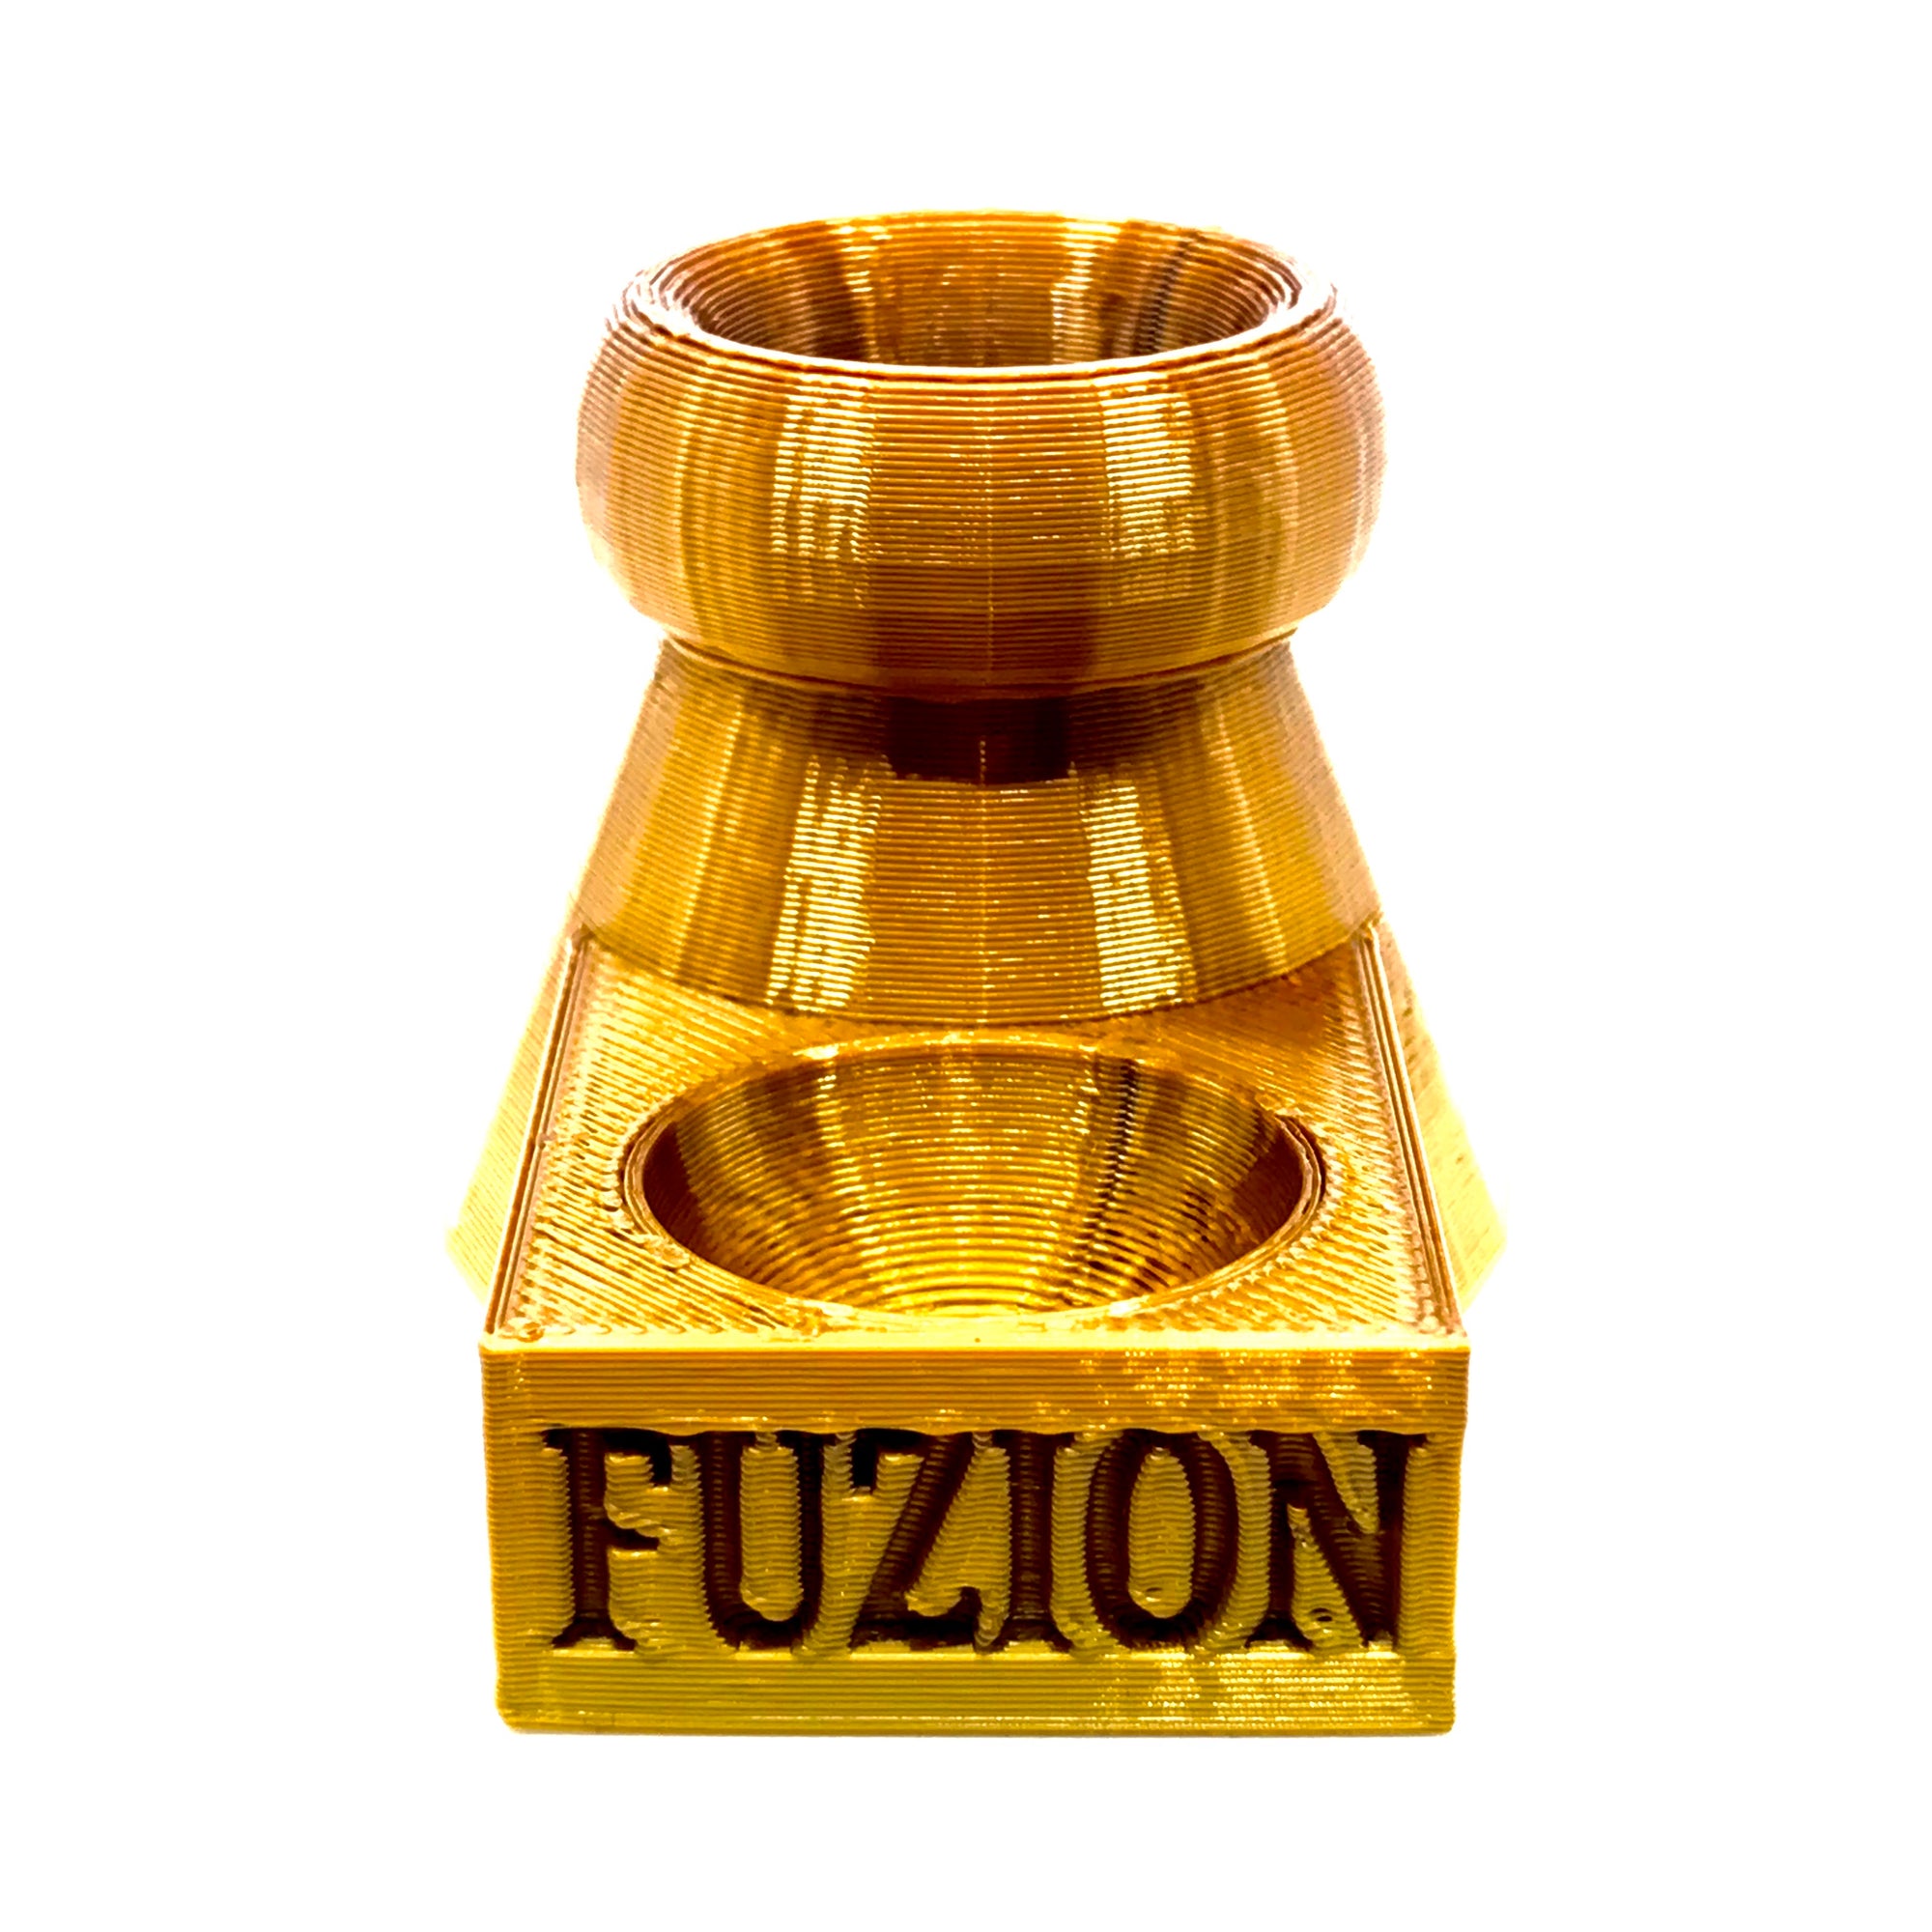 FUZION 3D Printed Bubble Cap and Terp Pearl Stand (Burnt Gold) show variants 